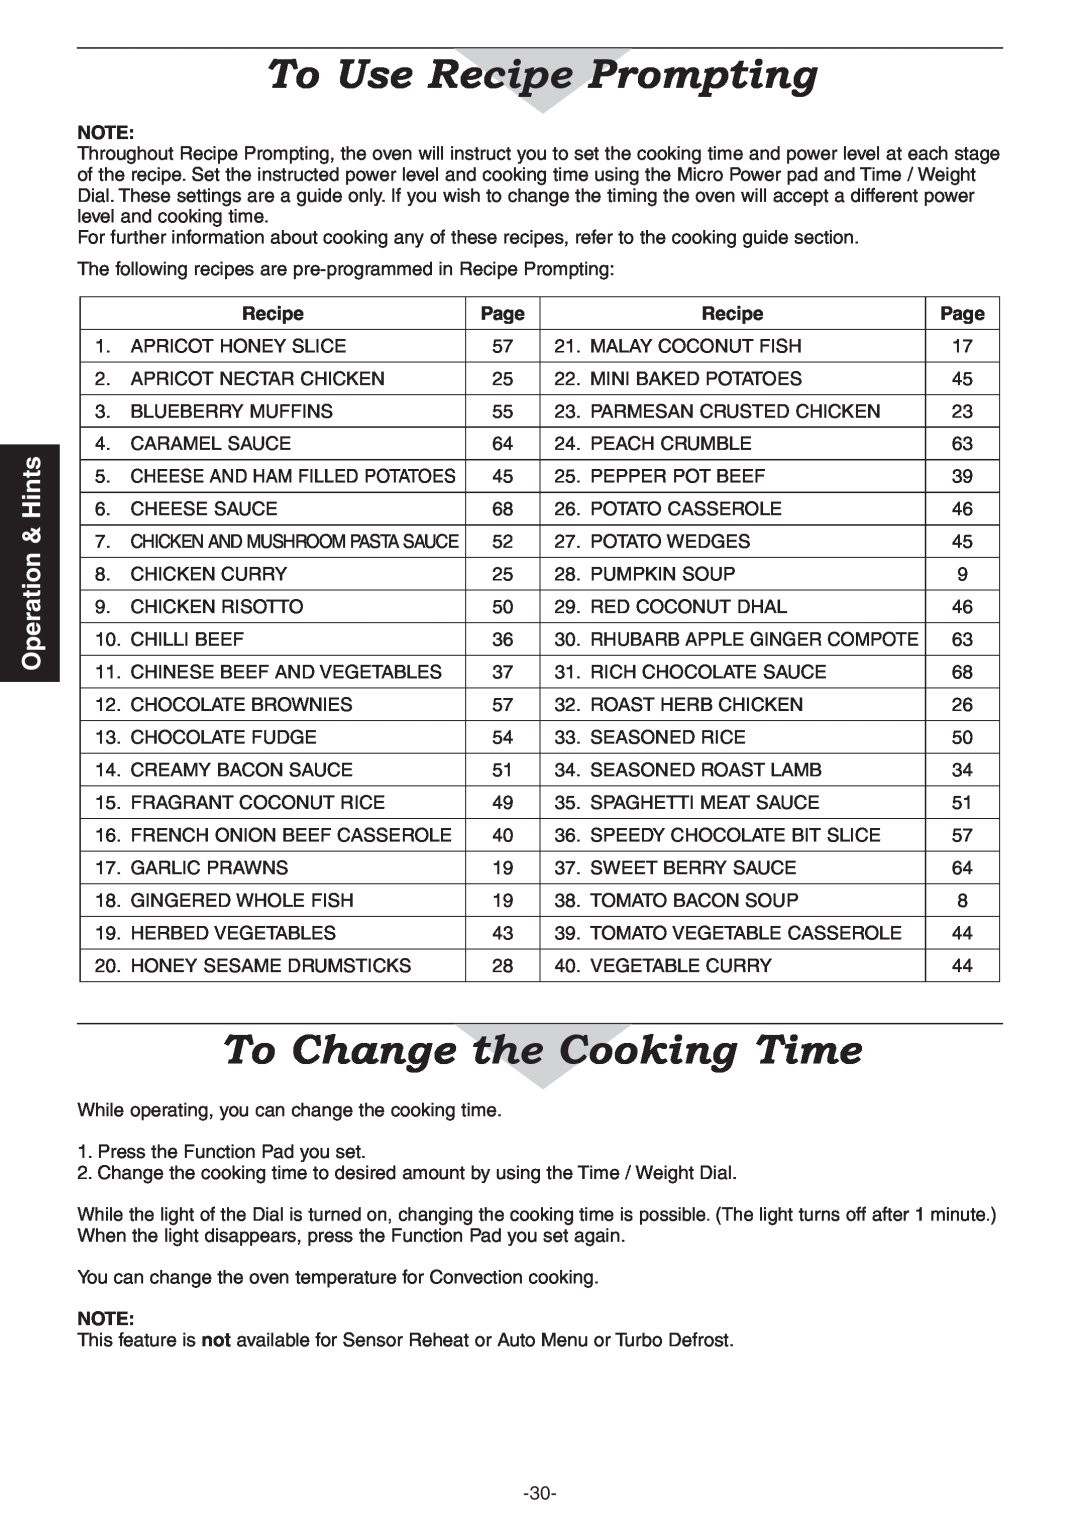 Panasonic NN-CD987W, NN-CD997S manual To Change the Cooking Time, Hints, To Use Recipe Prompting 